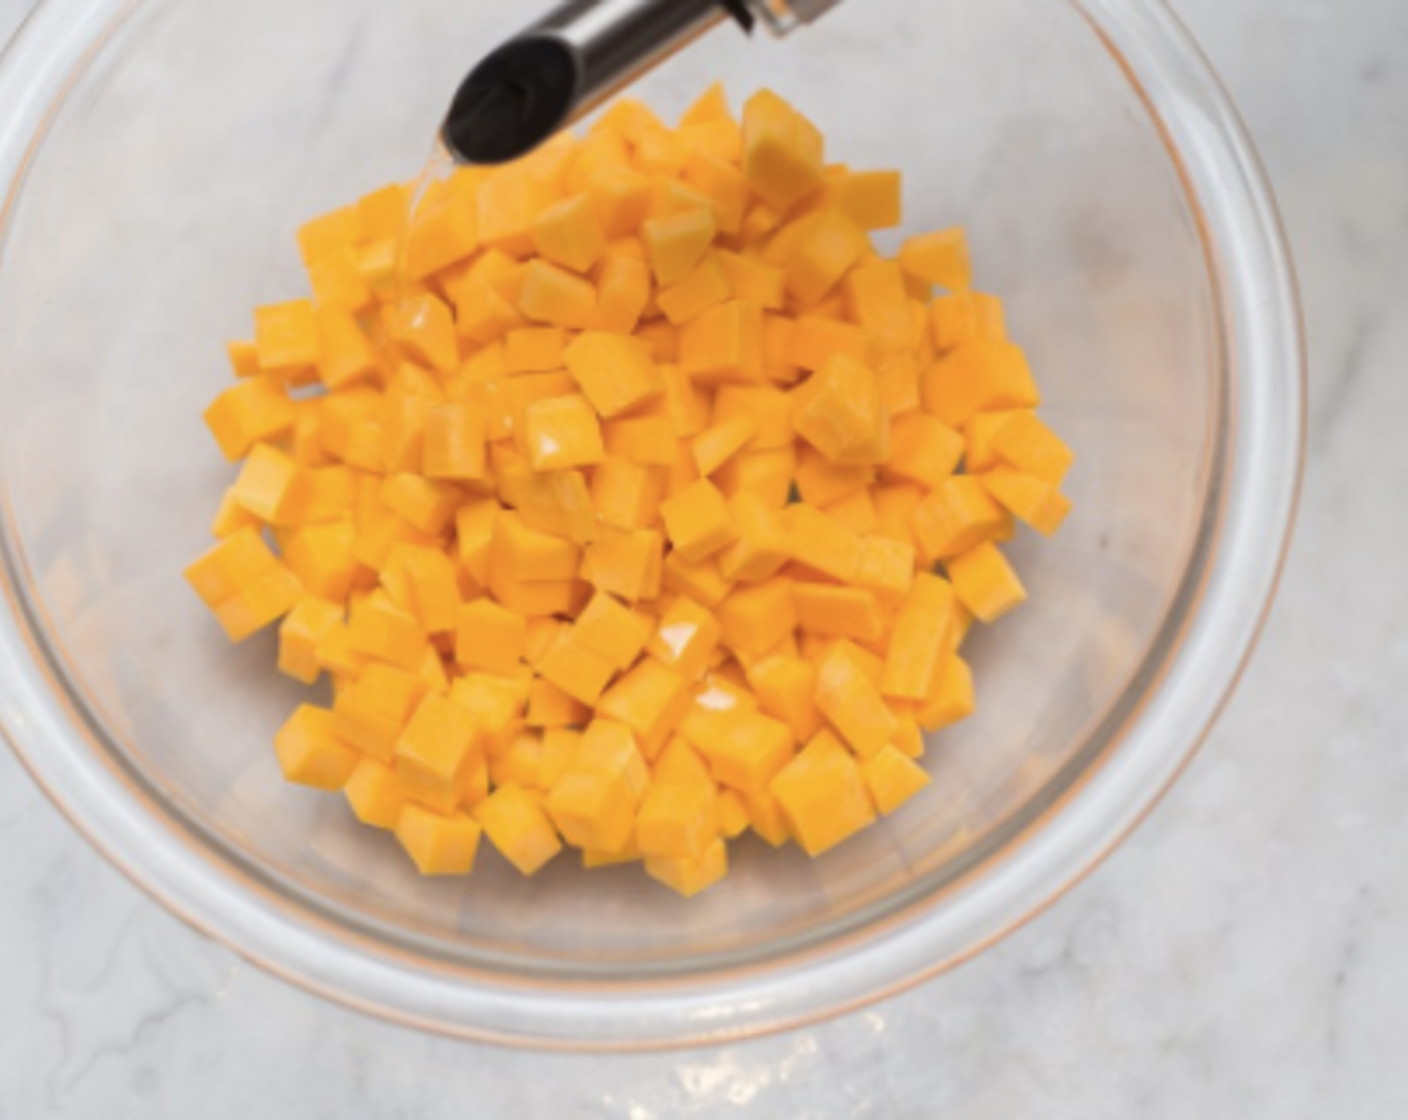 step 3 In a bowl, toss butternut squash with Olive Oil (1 cup). Spread on a baking sheet or baking pan, and roast 10-15 minutes, until tender when pierced by a fork.